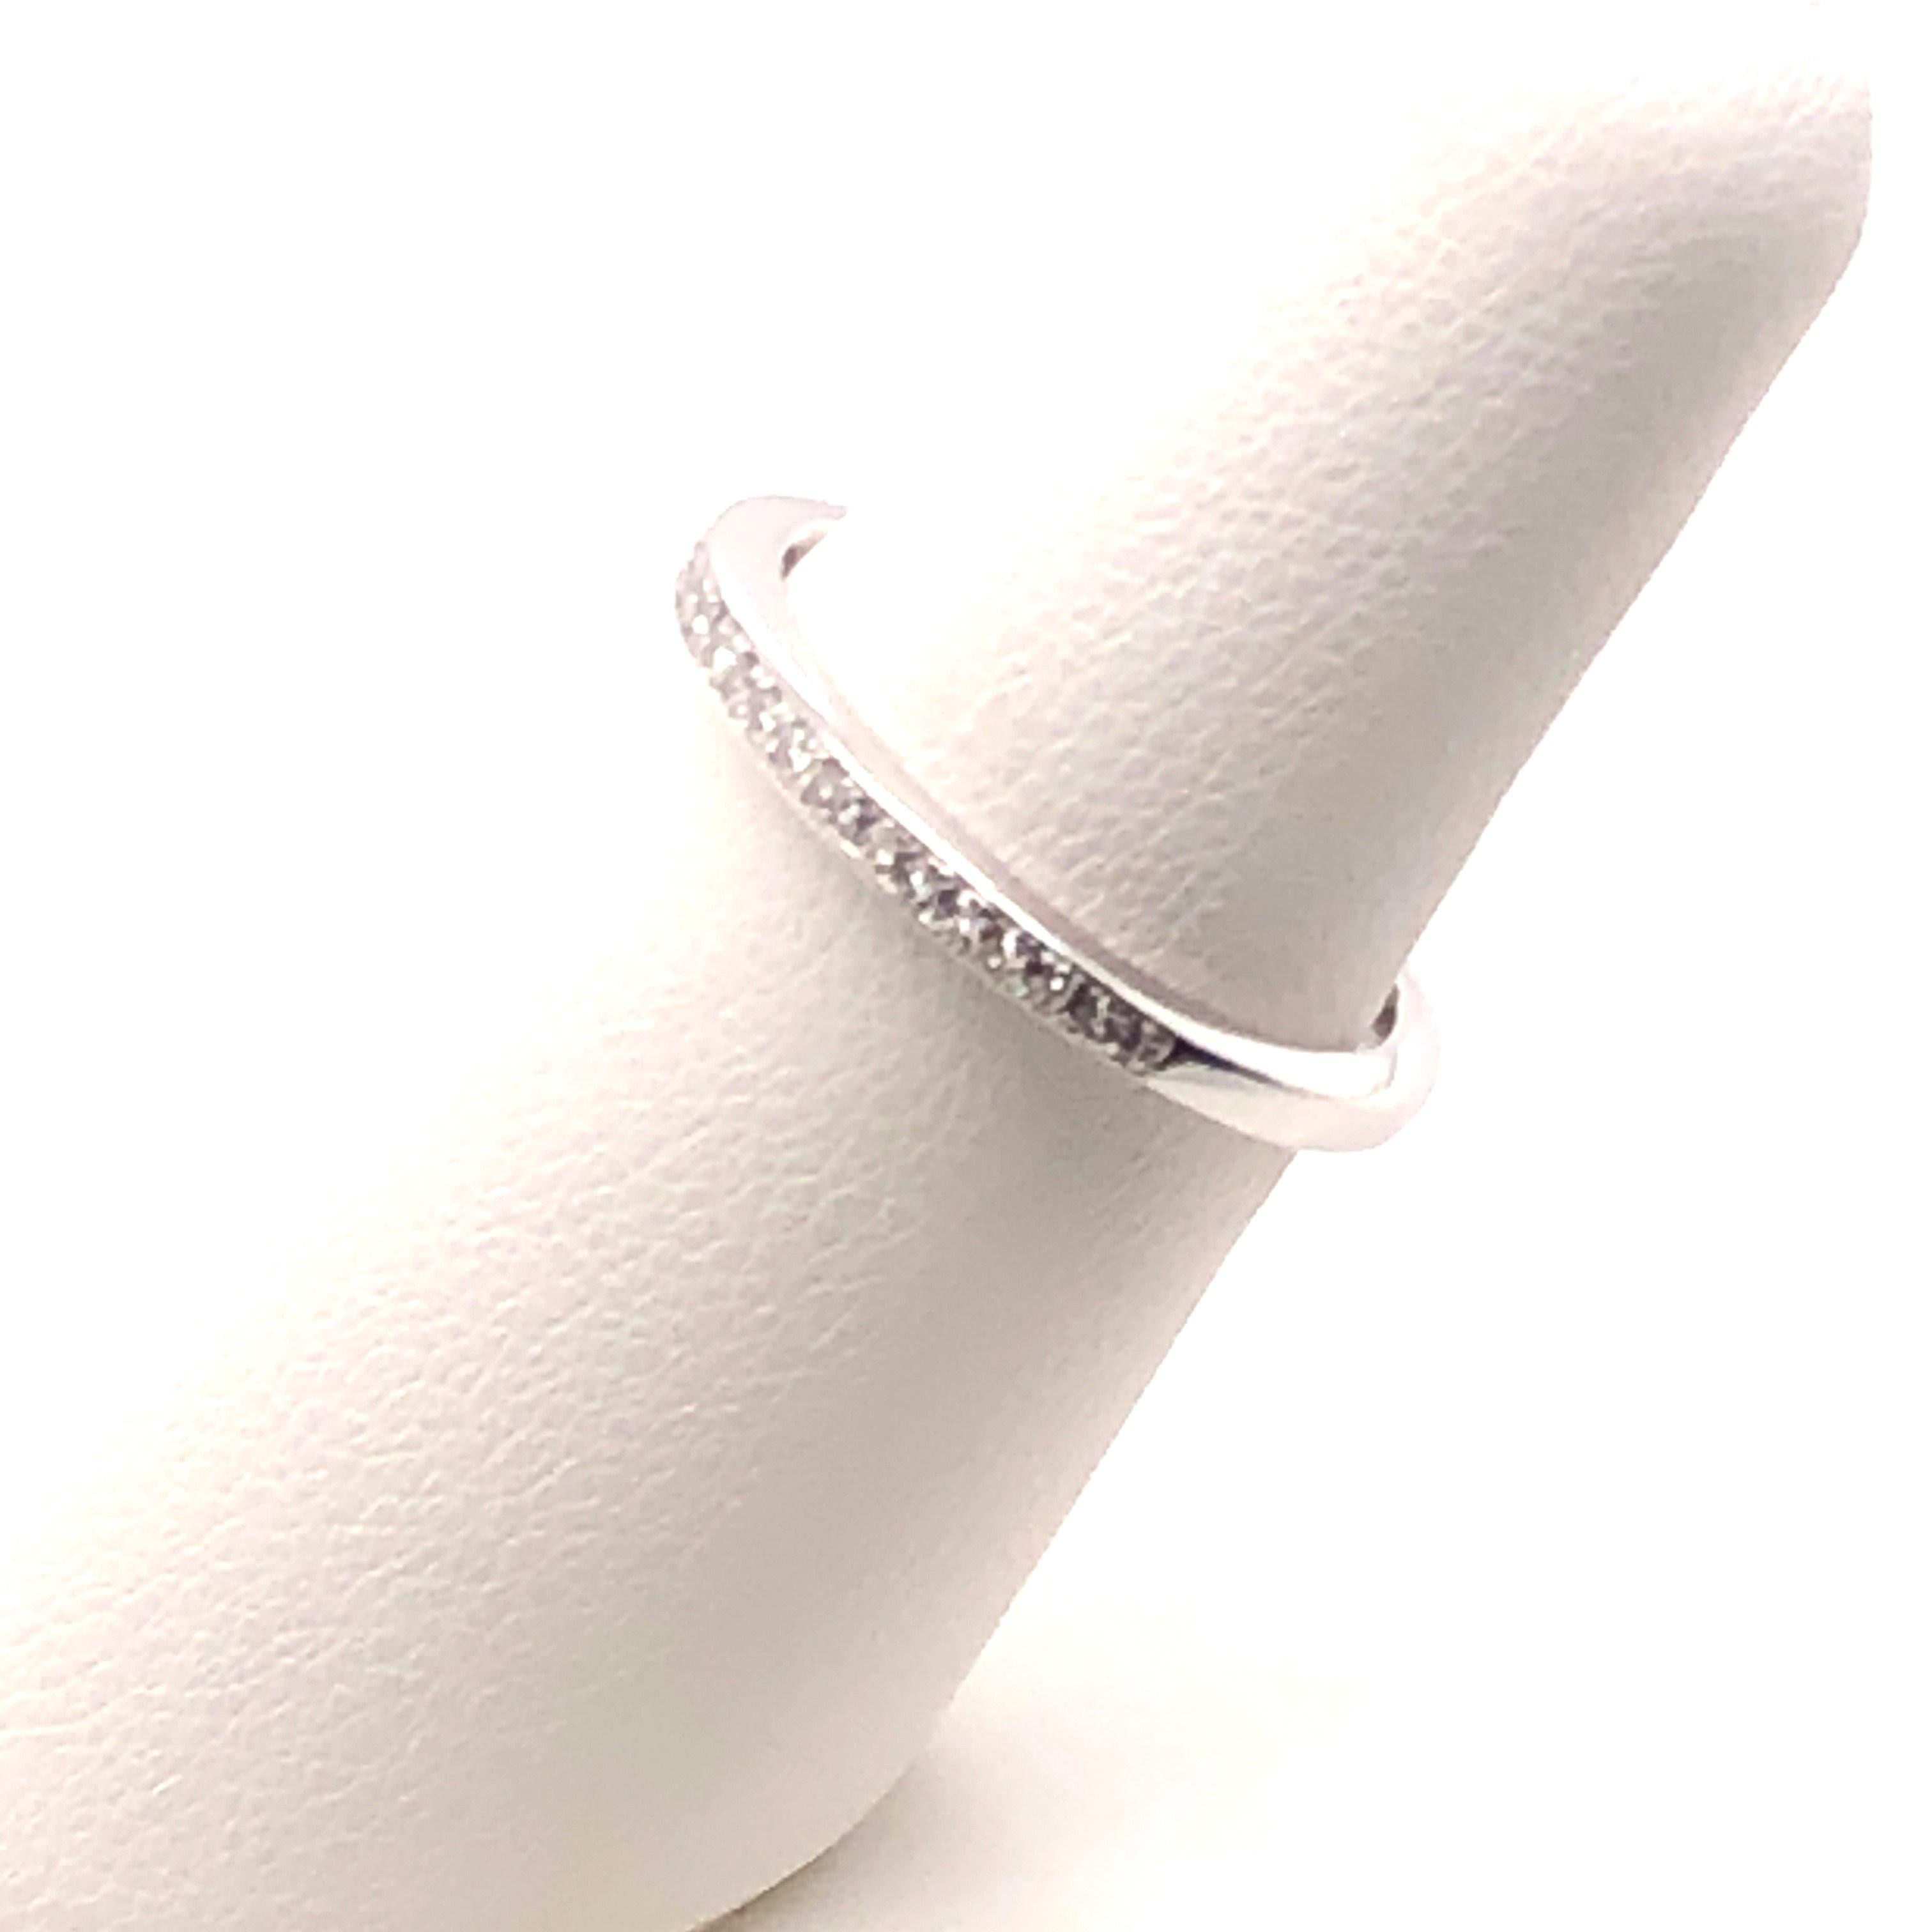 Sleek and sparkly 14kt white gold band with approximately .38 carats to H-I color and SI1-SI2 diamonds. The ring is 2.35mm x 1.75mm and a finger size 6. This band can be sized up or down approximately 2 sizes. This is a great stackable ring!